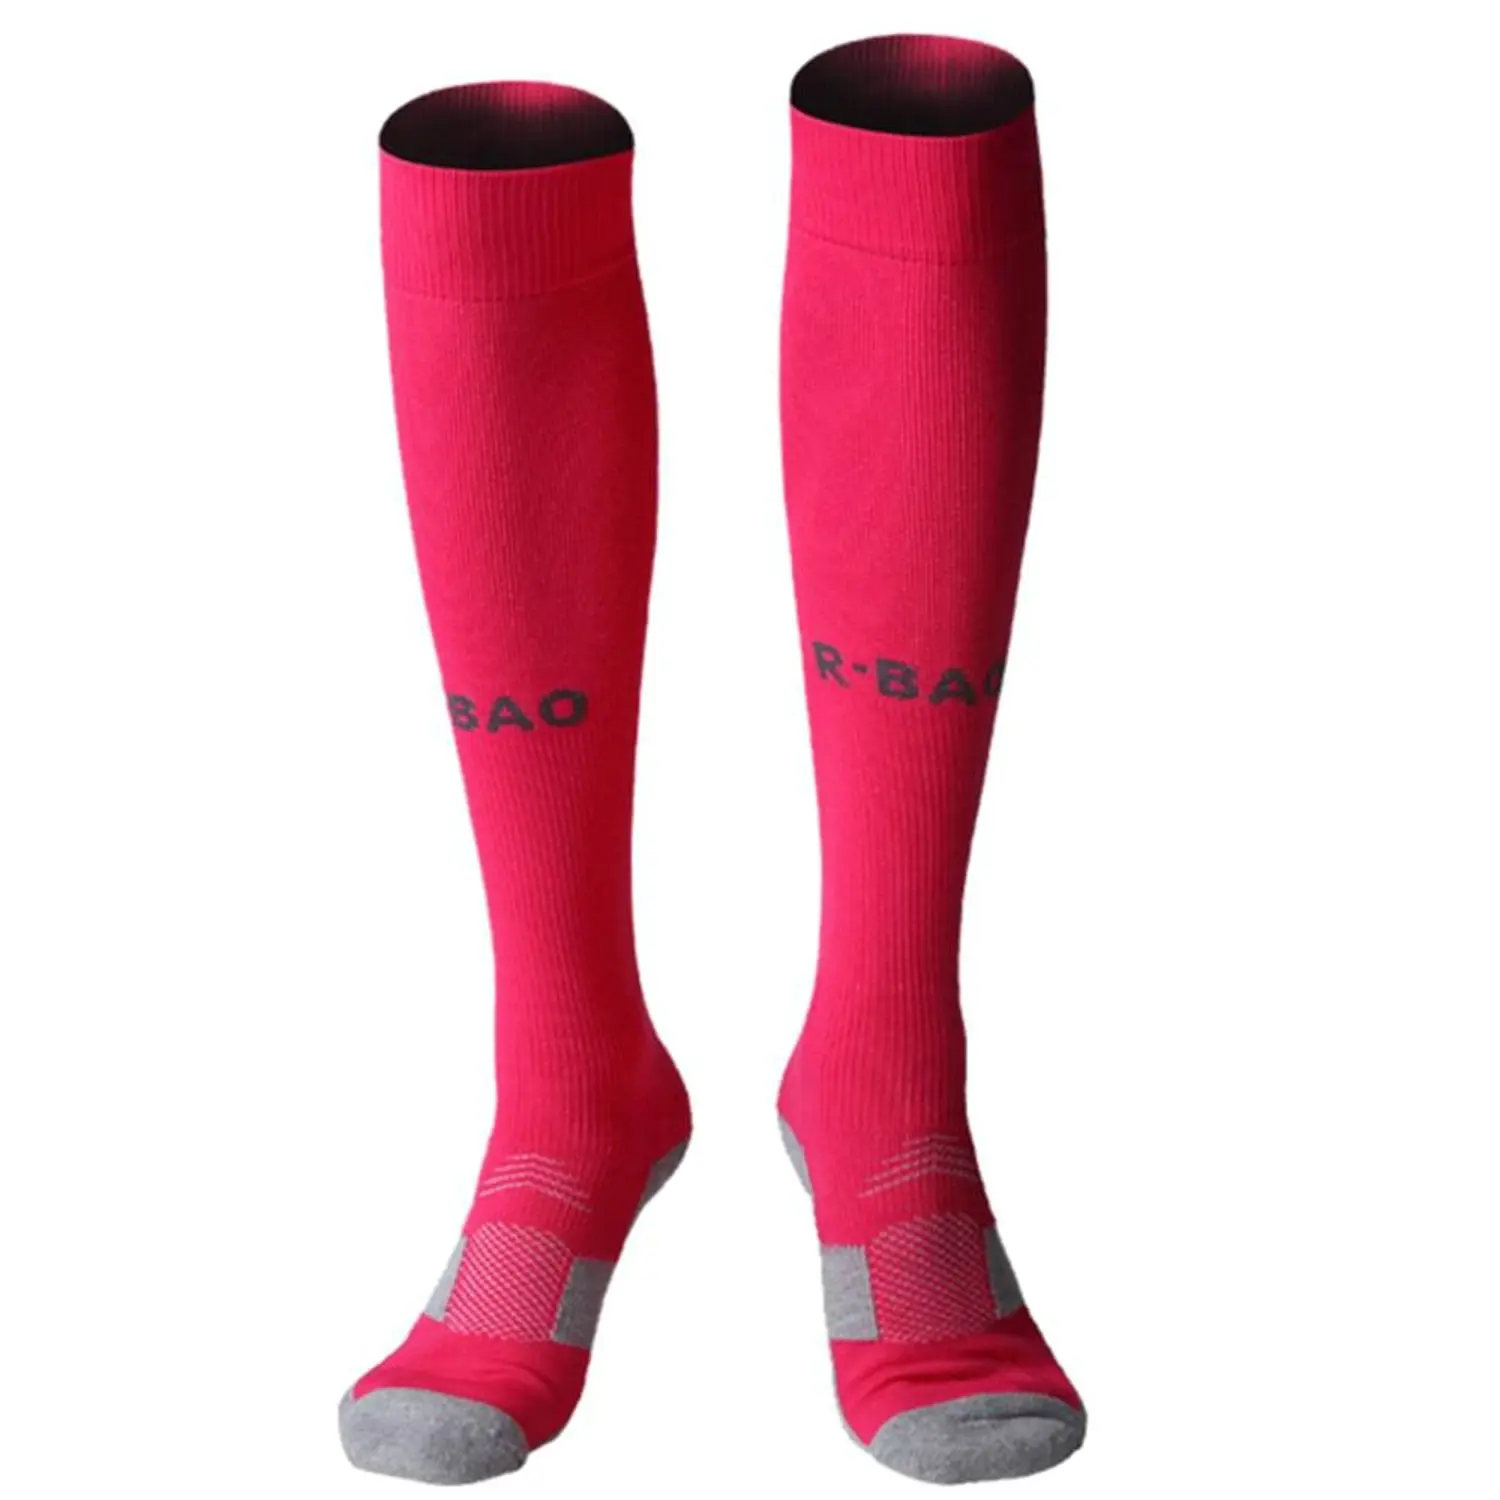 Cheap Pink Football Socks Wholesale, find Pink Football Socks Wholesale ...